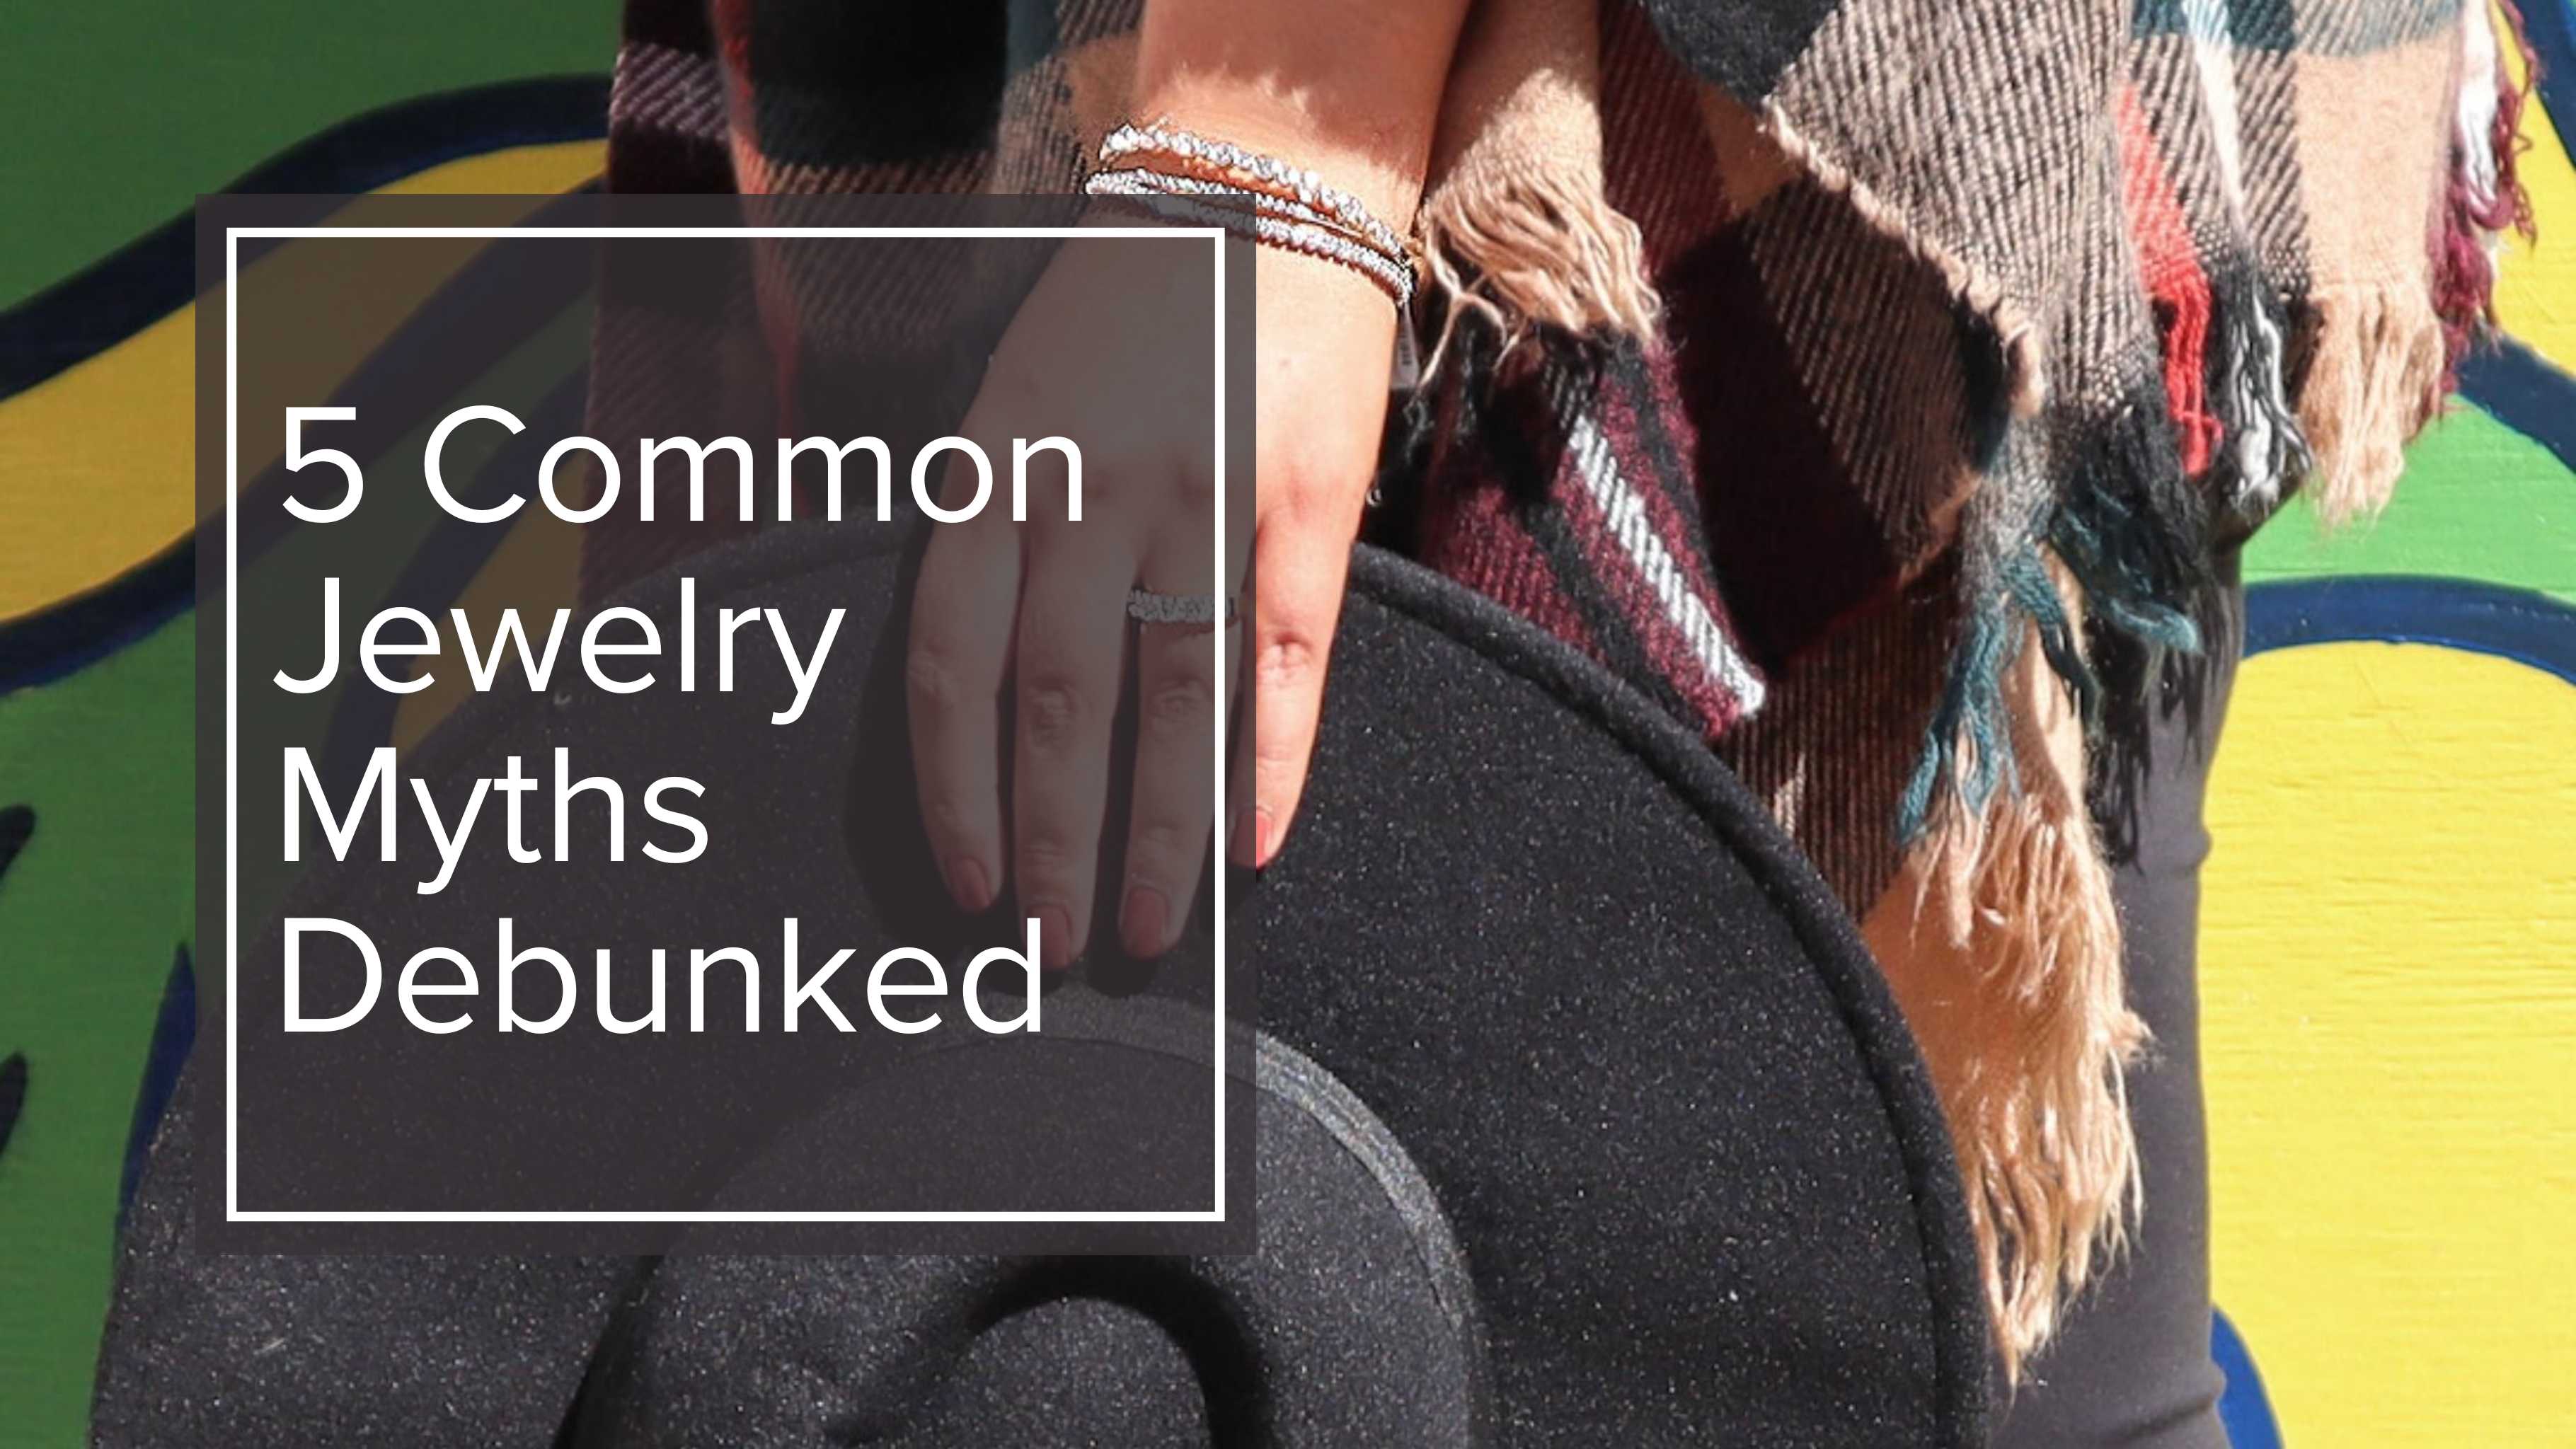 5 Common Jewelry Myths Debunked